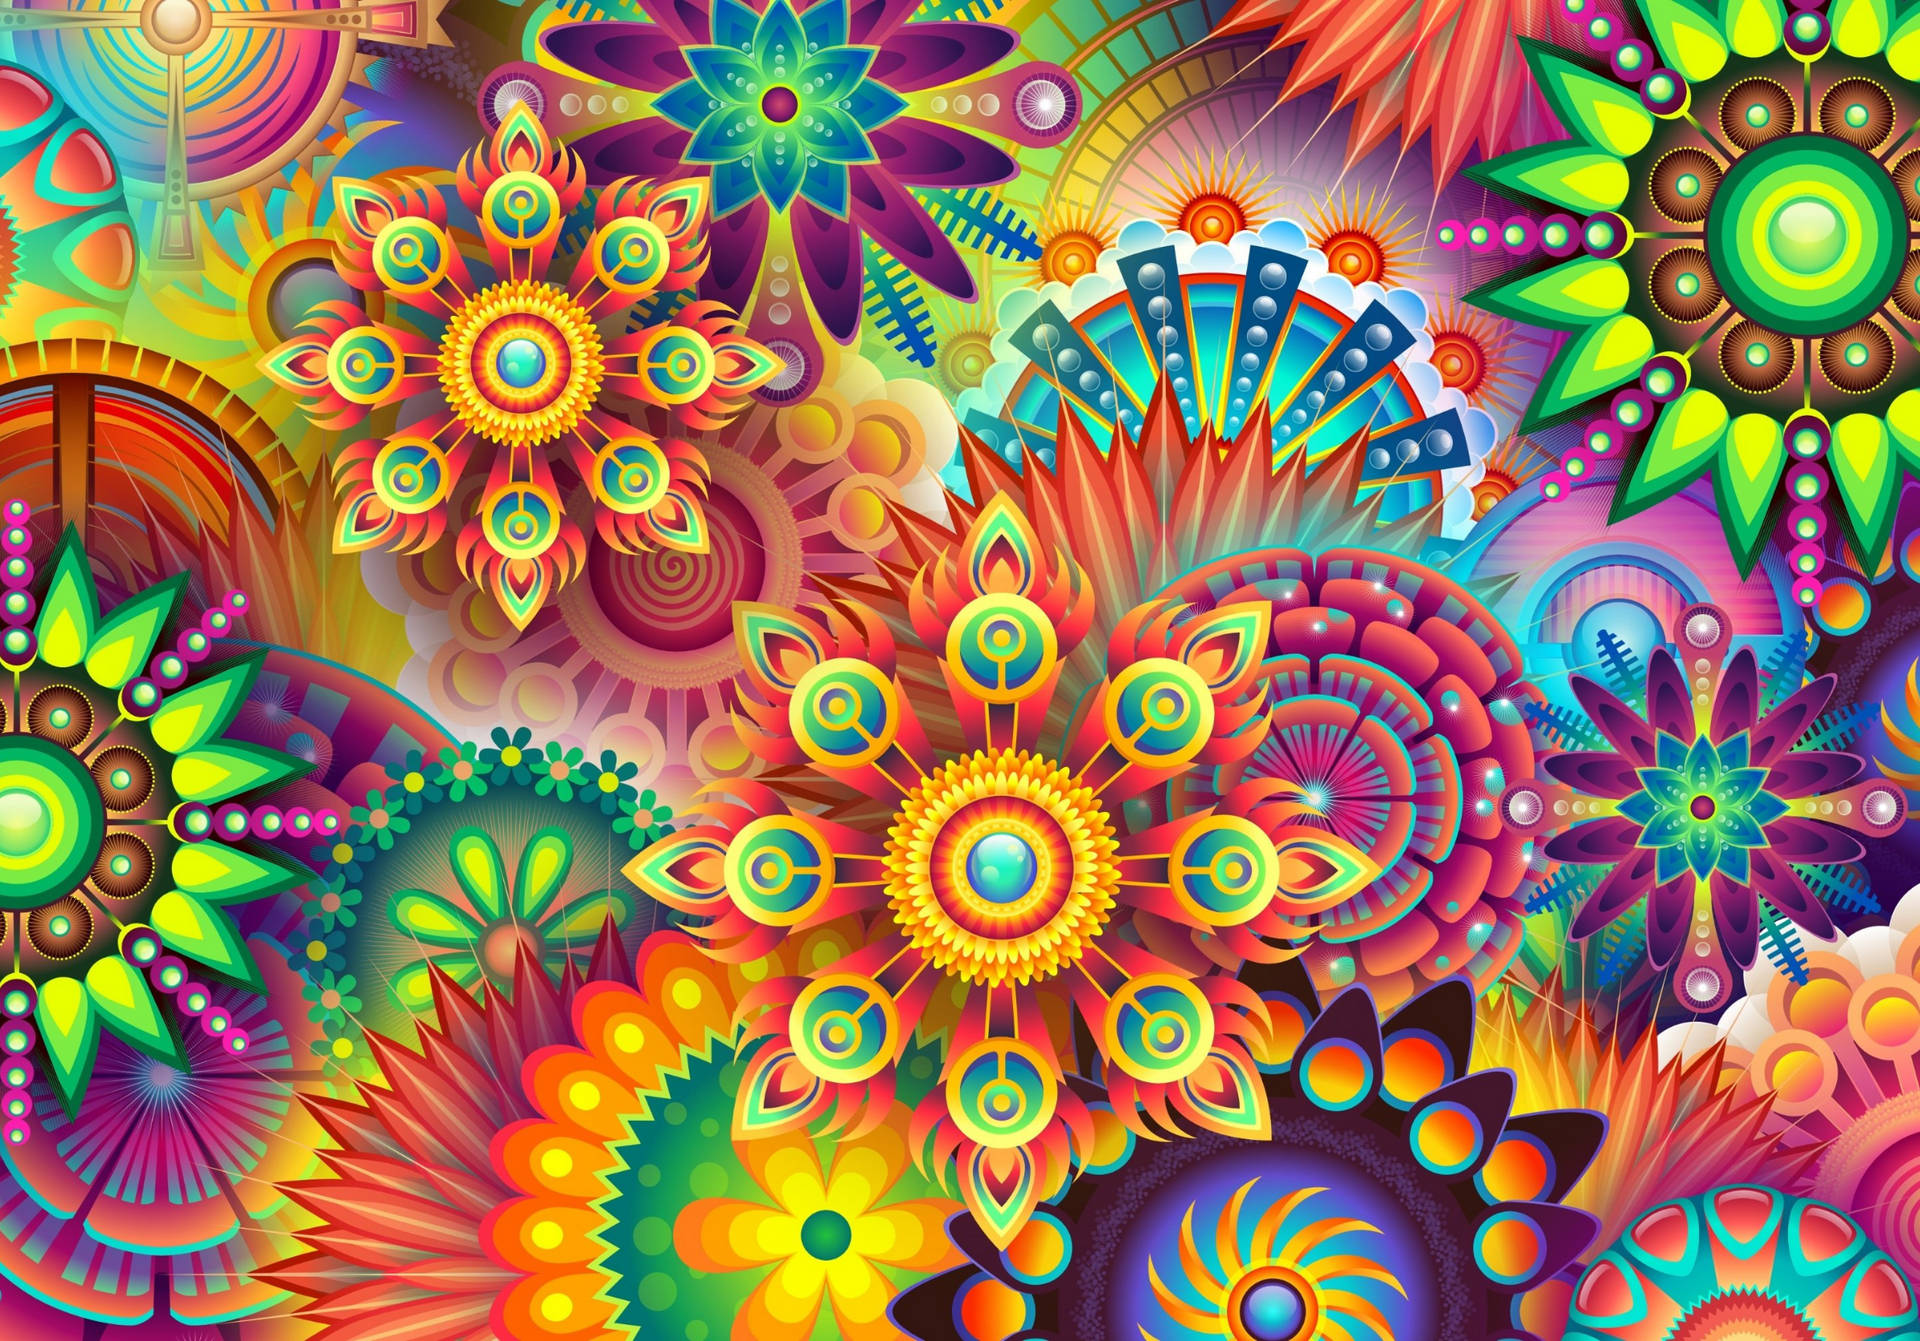 Ipad Pro 12.9 Psychedelic Flowers Background